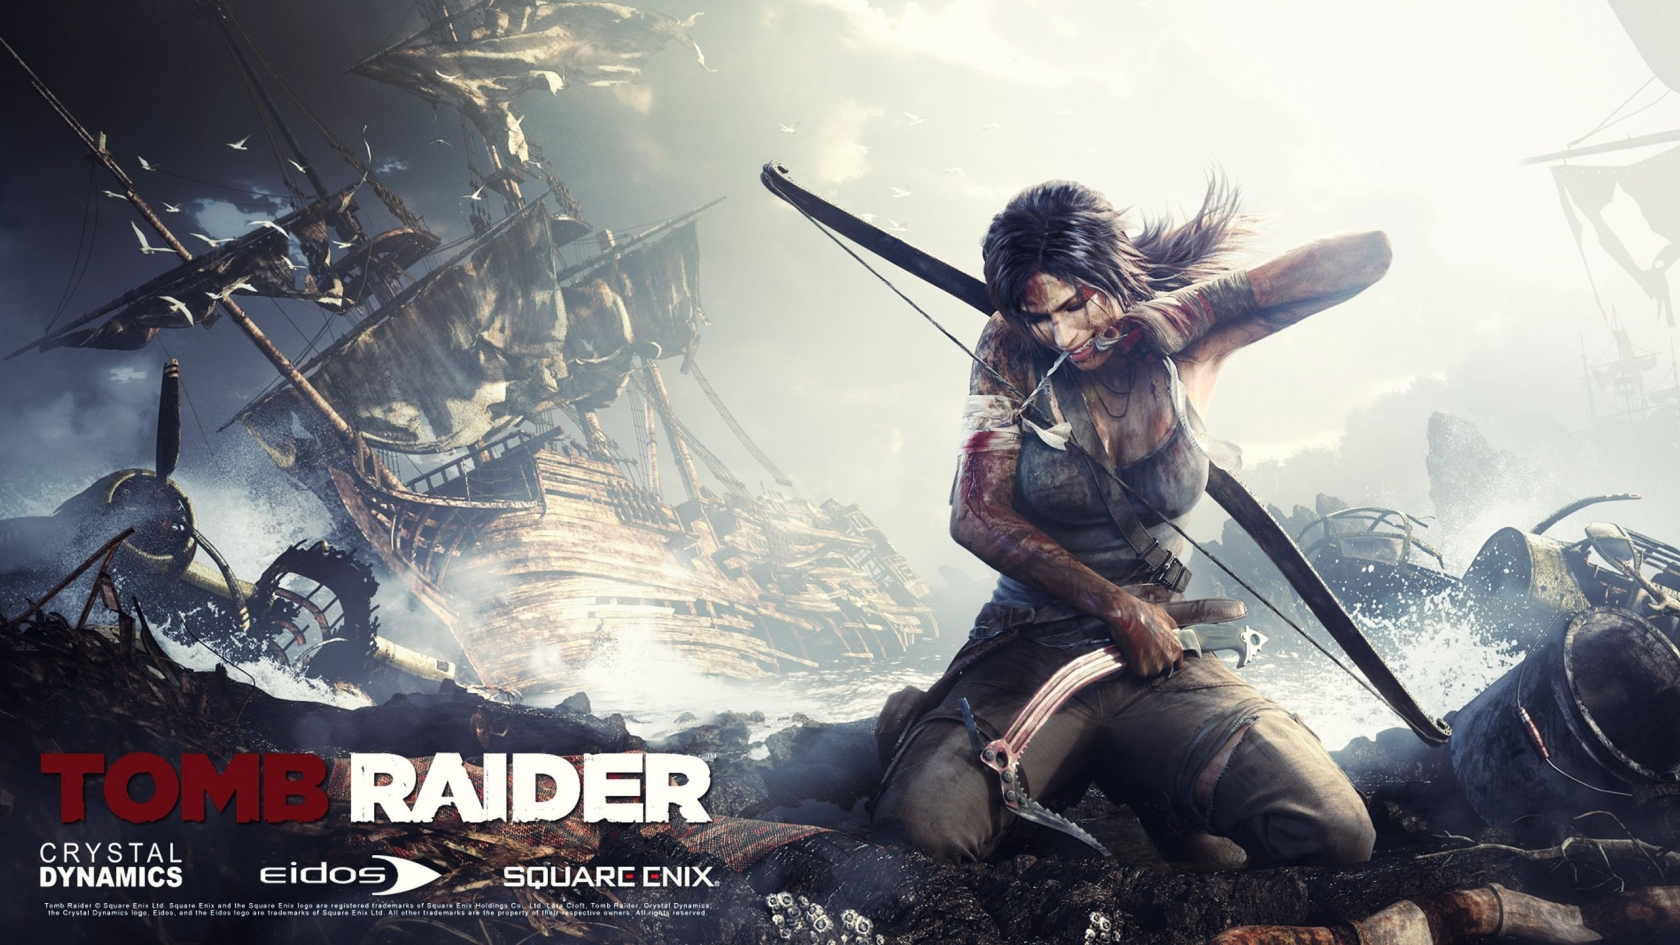 Tomb Raider Weapons Unlocked for 1680 x 945 HDTV resolution